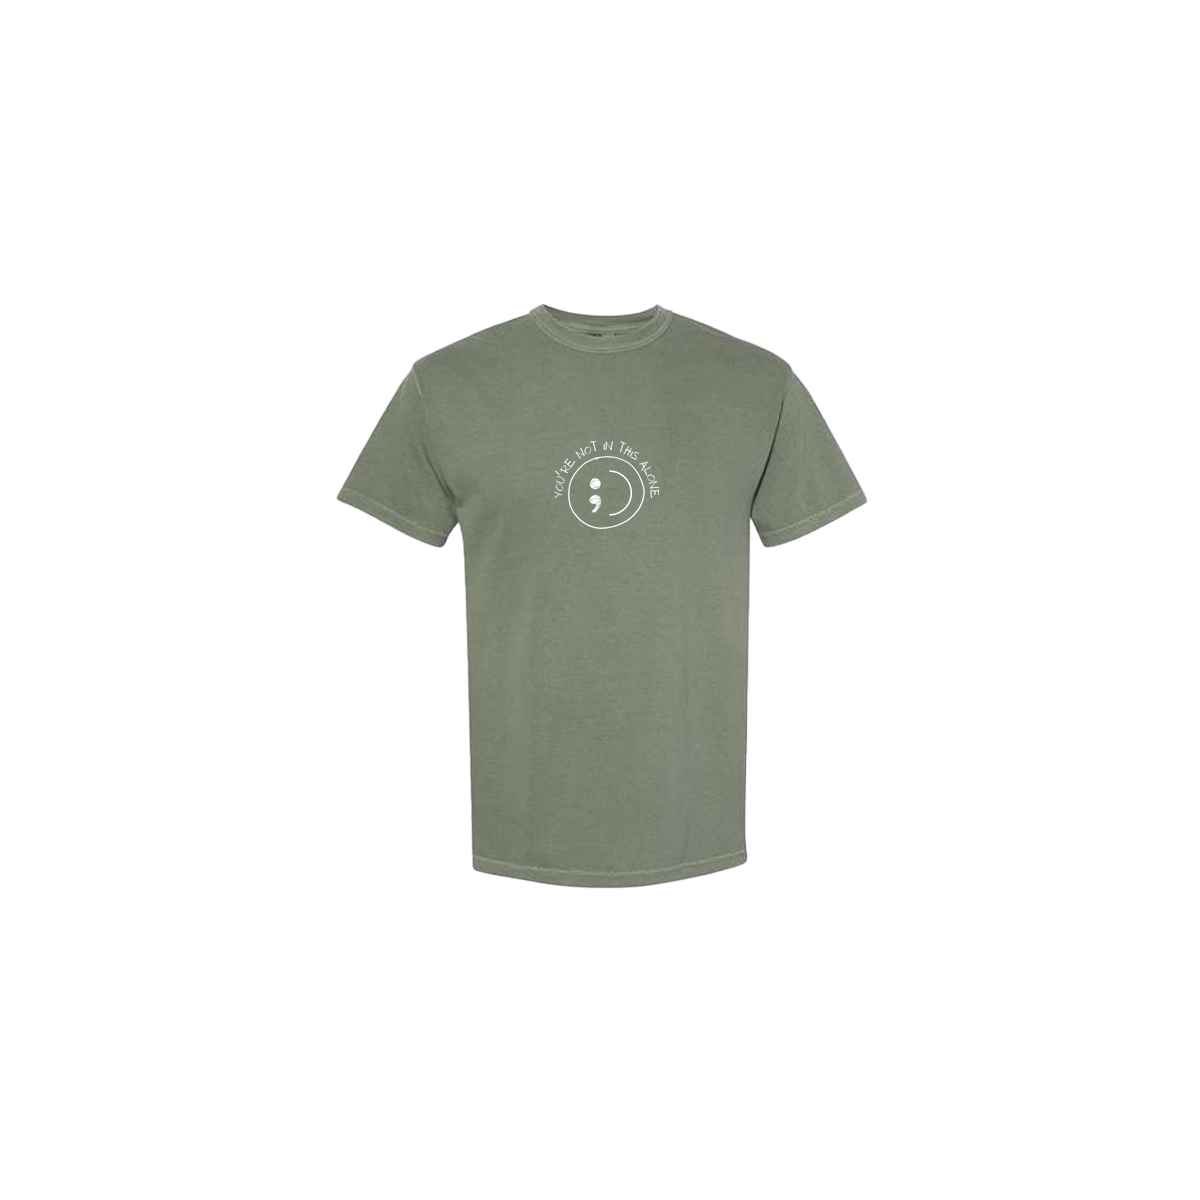 You're Not In This Alone Embroidered Army Green Tshirt - Mental Health Awareness Clothing